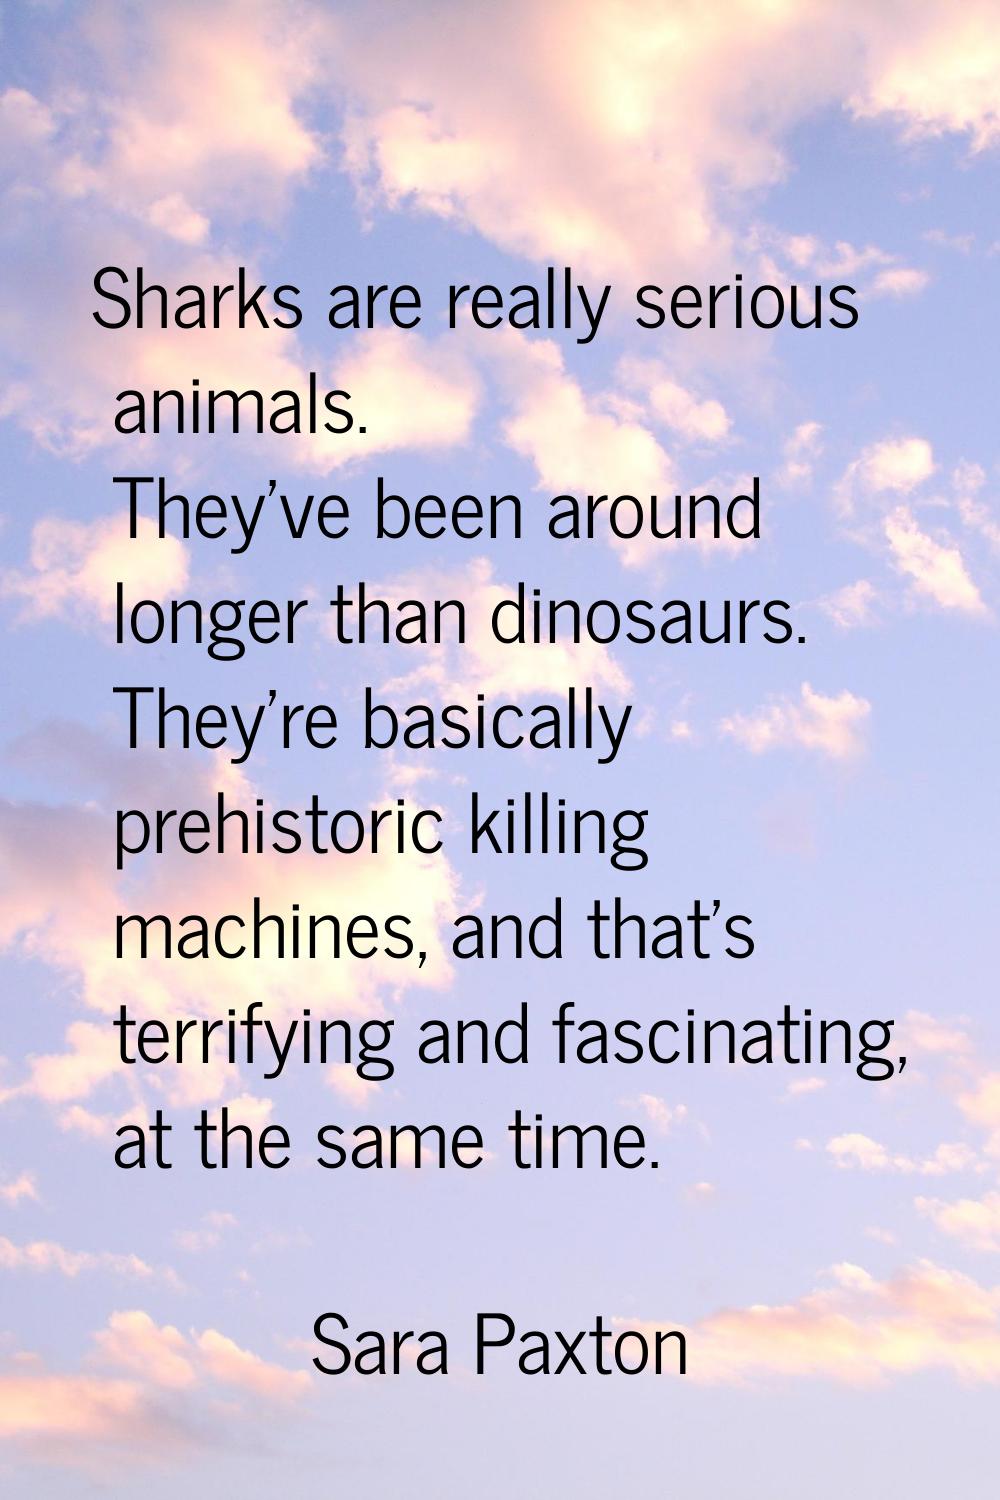 Sharks are really serious animals. They've been around longer than dinosaurs. They're basically pre